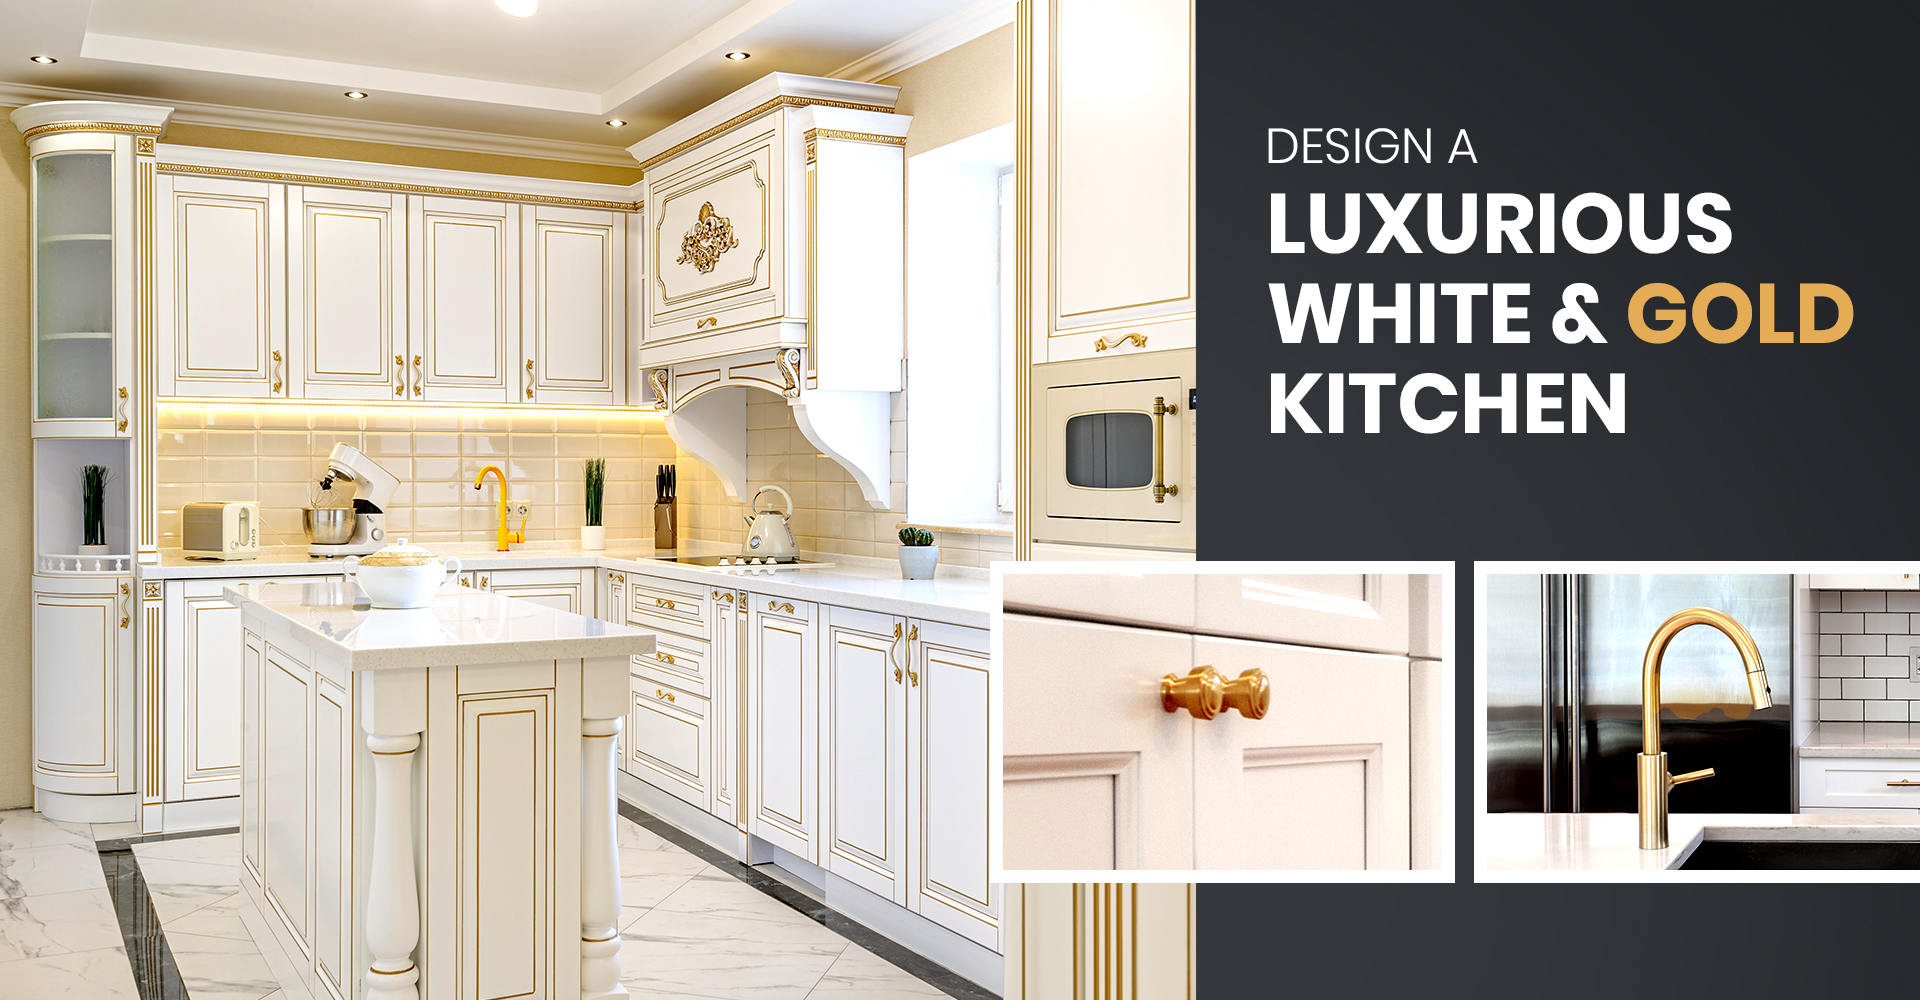 White and Gold Kitchen Design Ideas Your Clients Will Love